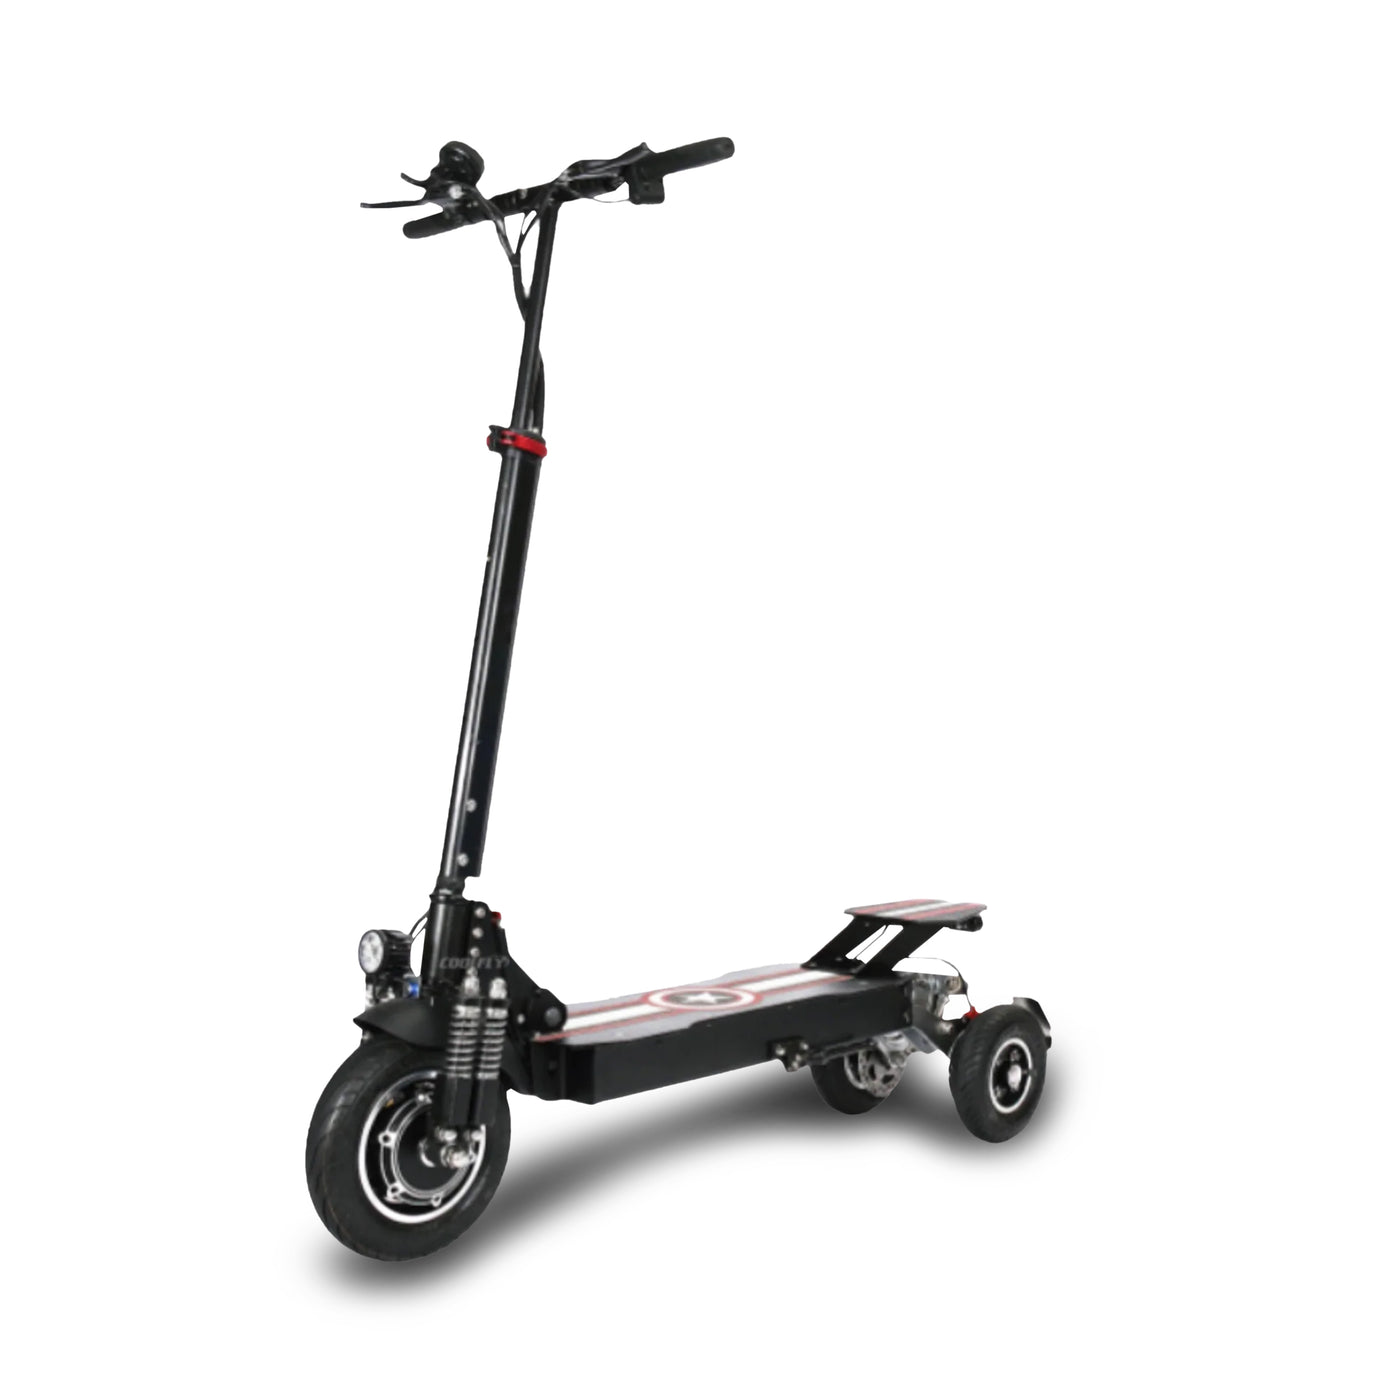 CoolFly-D10- 2000w 48v - Dual Motor Folding Electric Scooter